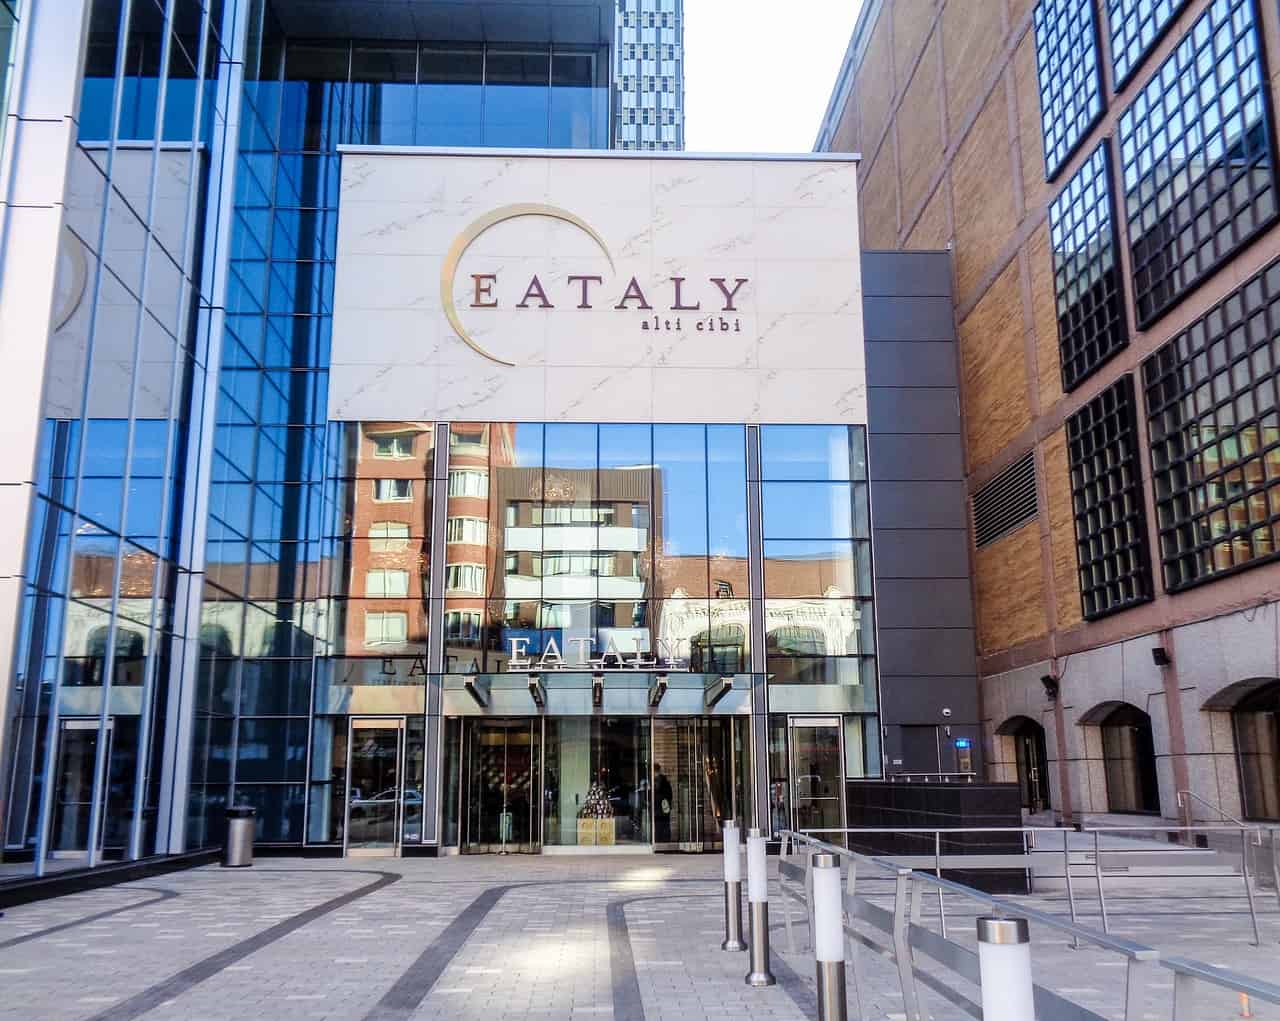 Boston's Eataly is not only one of the best Italian restaurants in the area, they also offer cooking classes so that you can learn about how to make your own excellent Italian food at home! Image source: Pixabay user Michelle Raponi. 